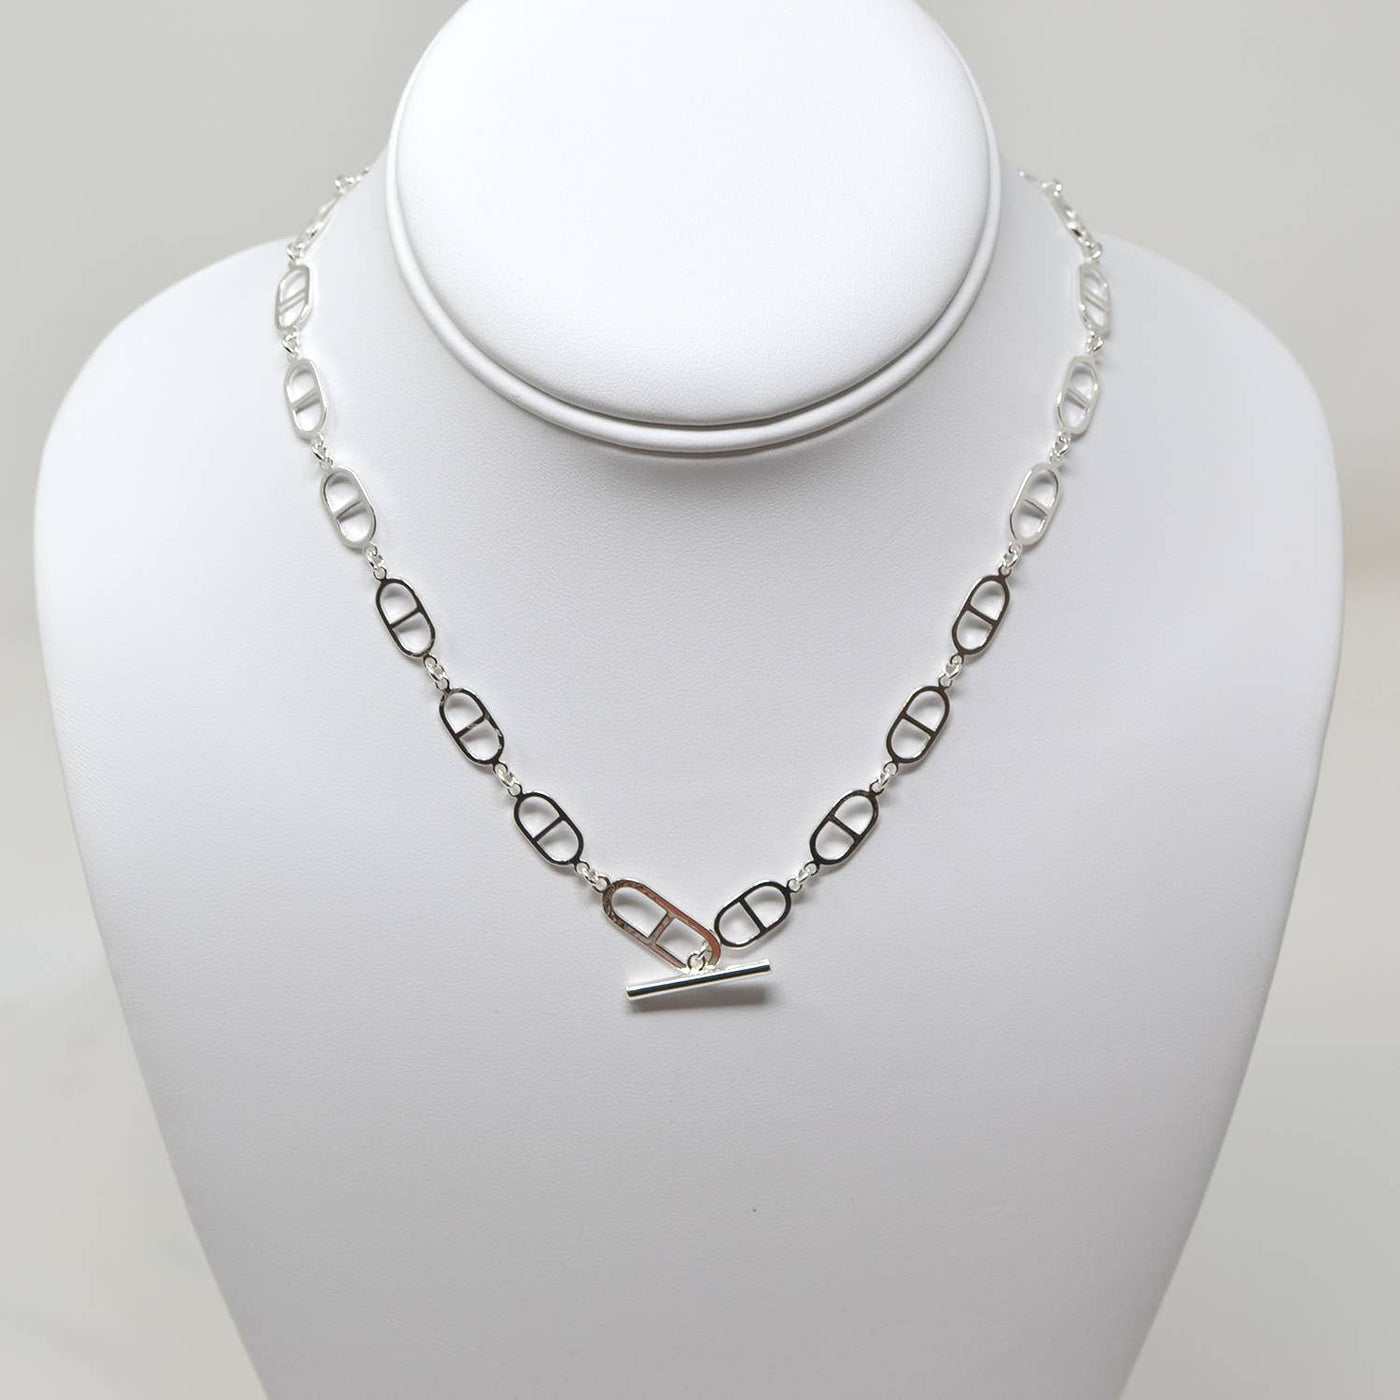 All Linked in Silver Necklace